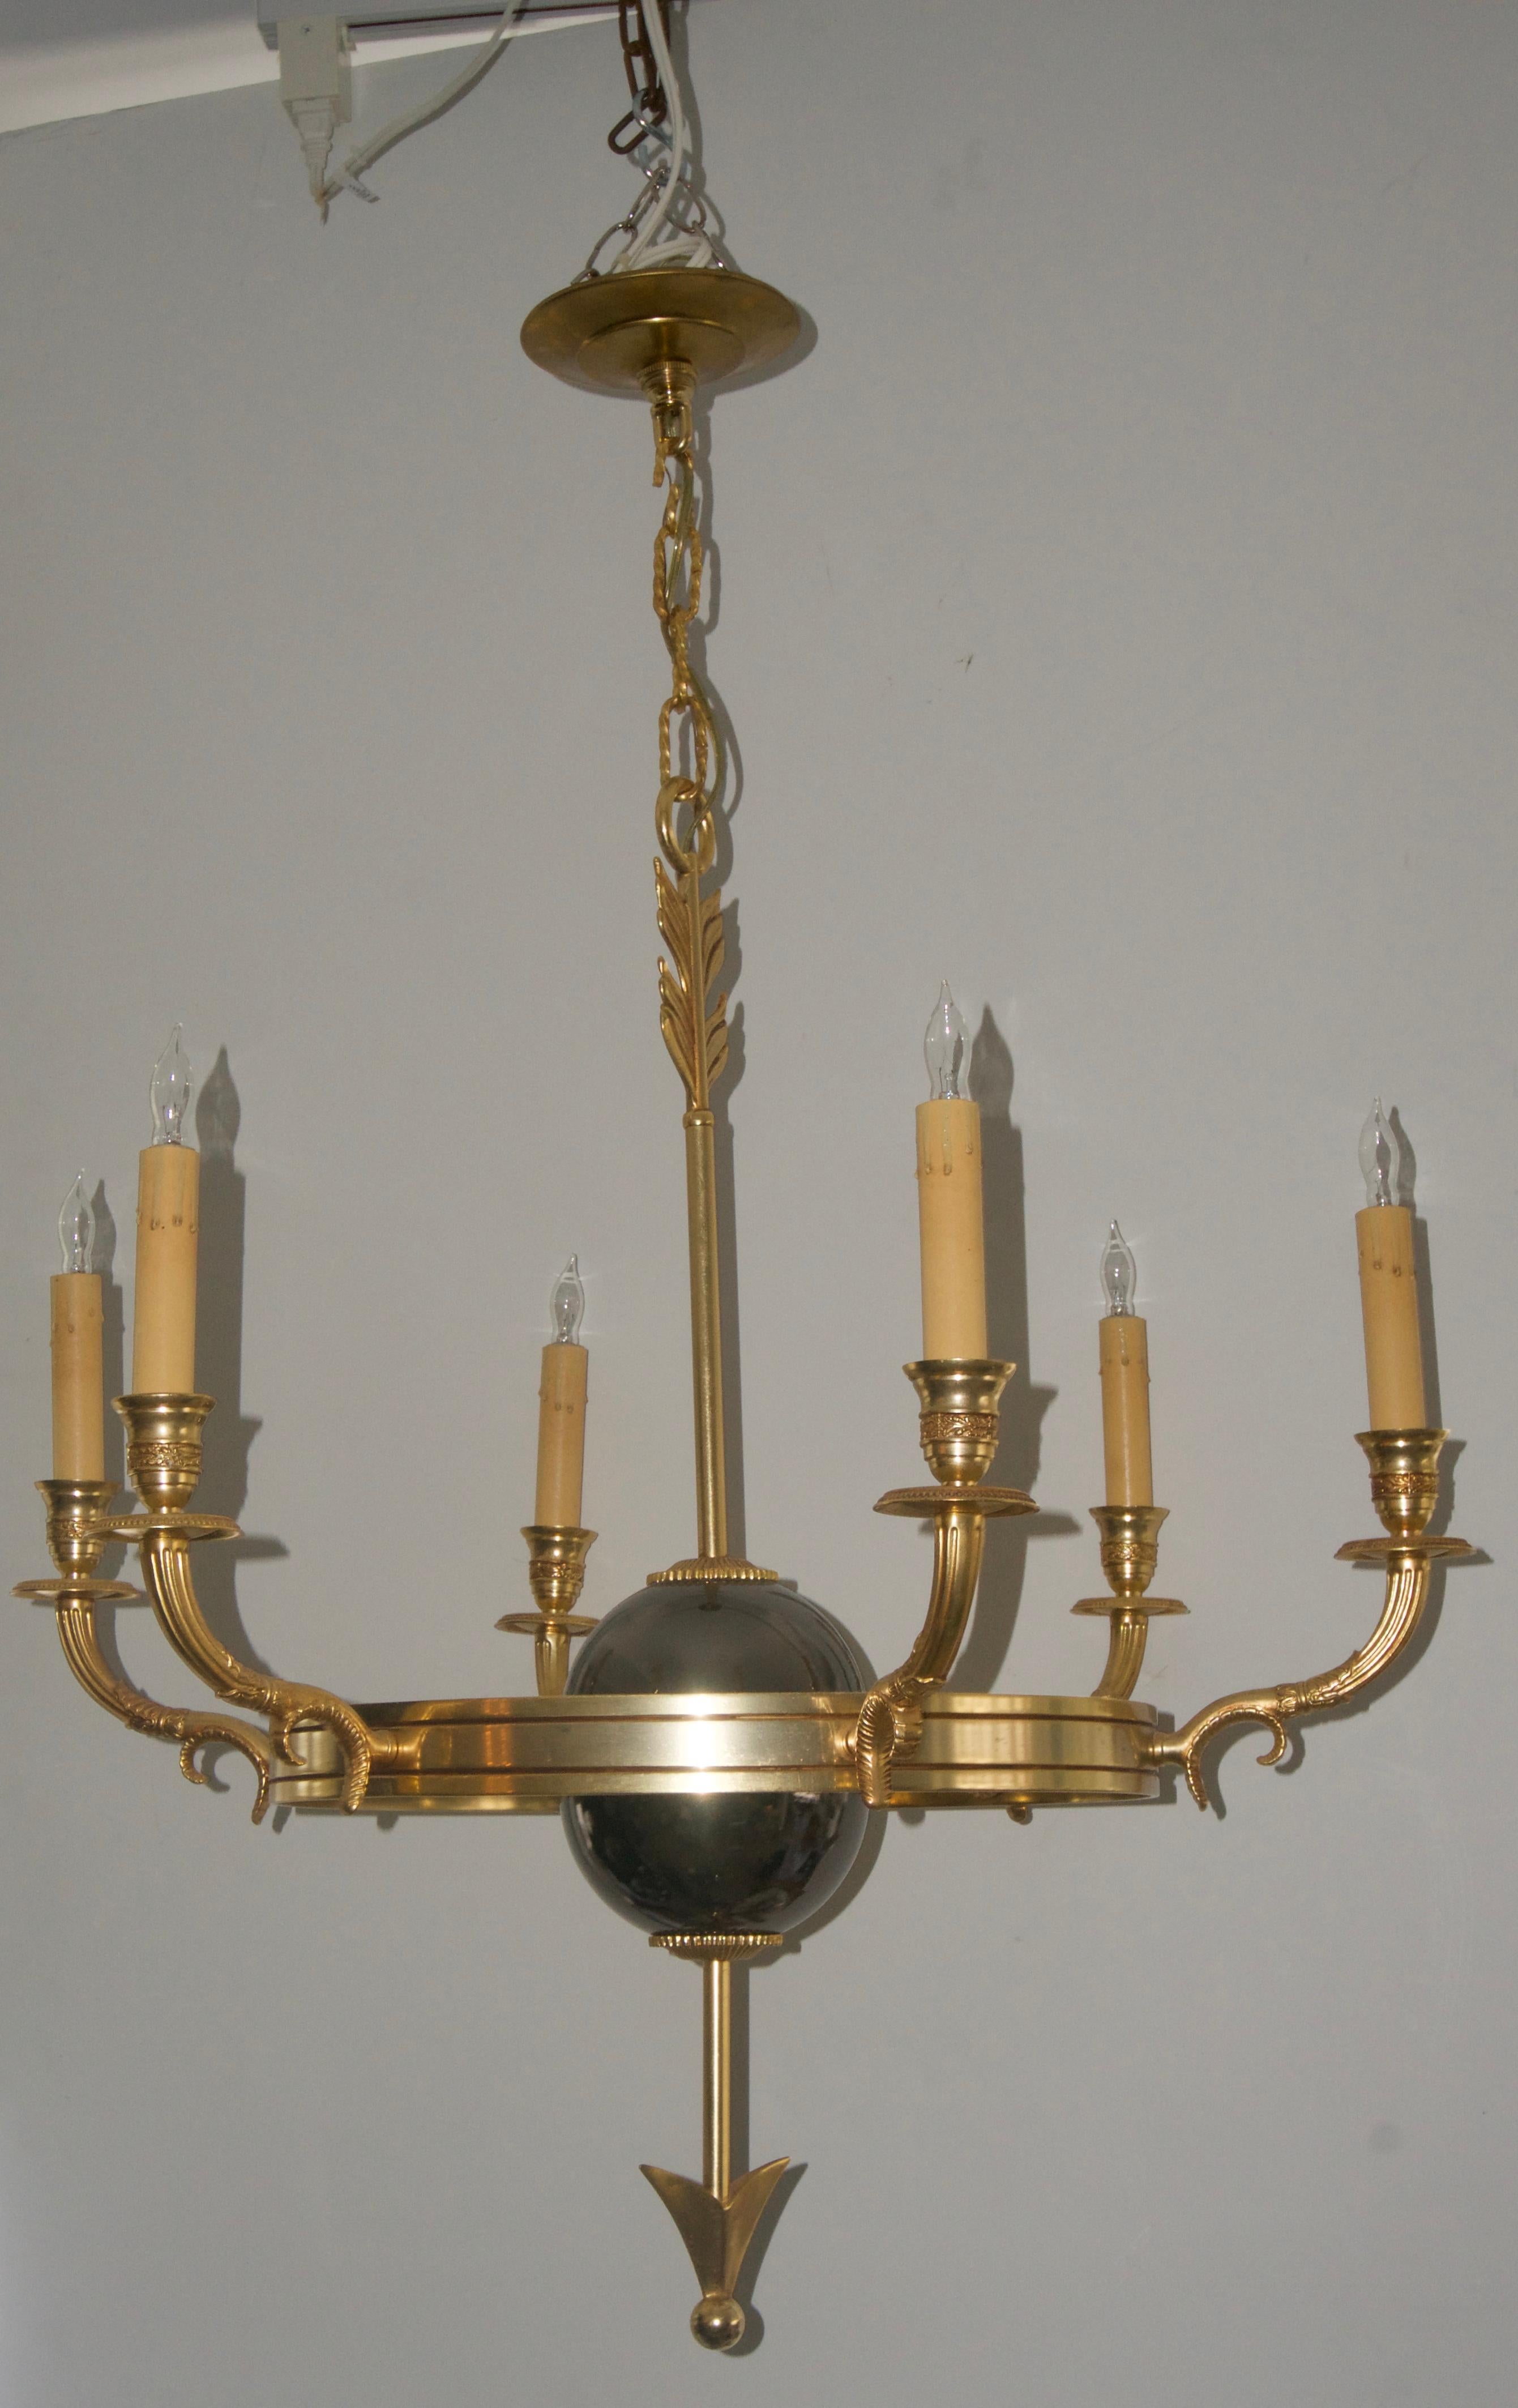 This stylish French Empire, Maison Jansen style chandelier was acquired from a Palm Beach estate and dates to the 1960s-1970s. 

Note: Height of just the chandelier and not including the chain is 28